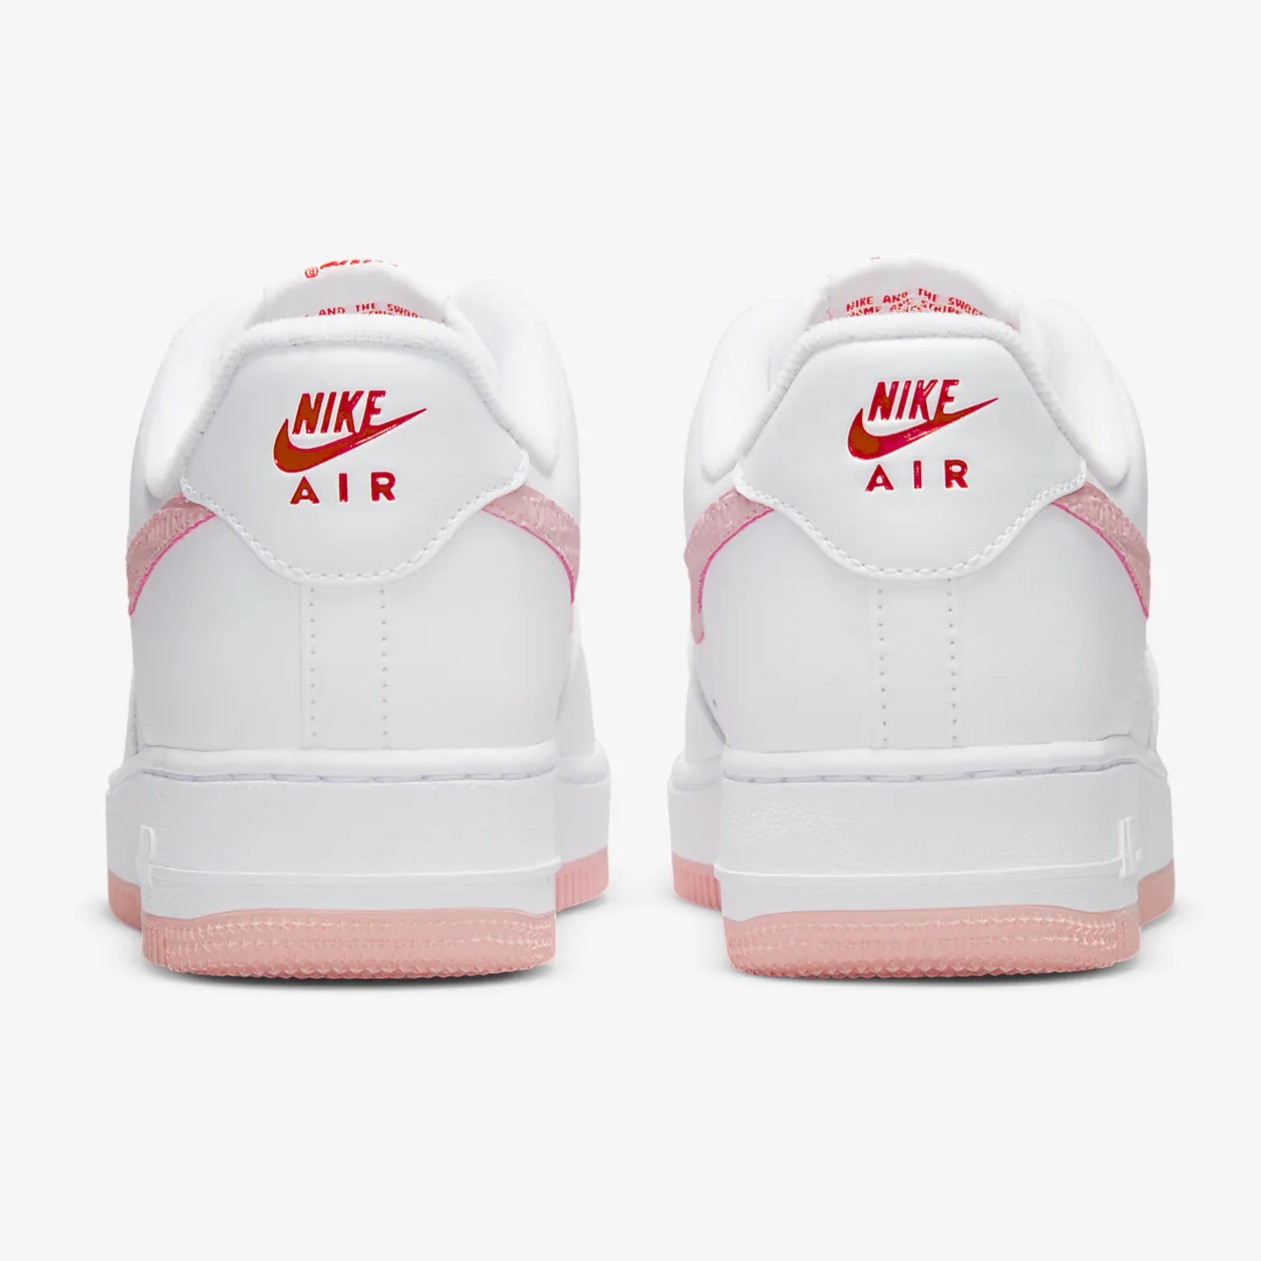 GIÀY THỂ THAO NỮ NIKE AIR FORCE 1 07 LOW VD VALENTINE´S DAY WHITE ATMOSPHERE UNIVERSITY RED SAIL DQ9320-100 13